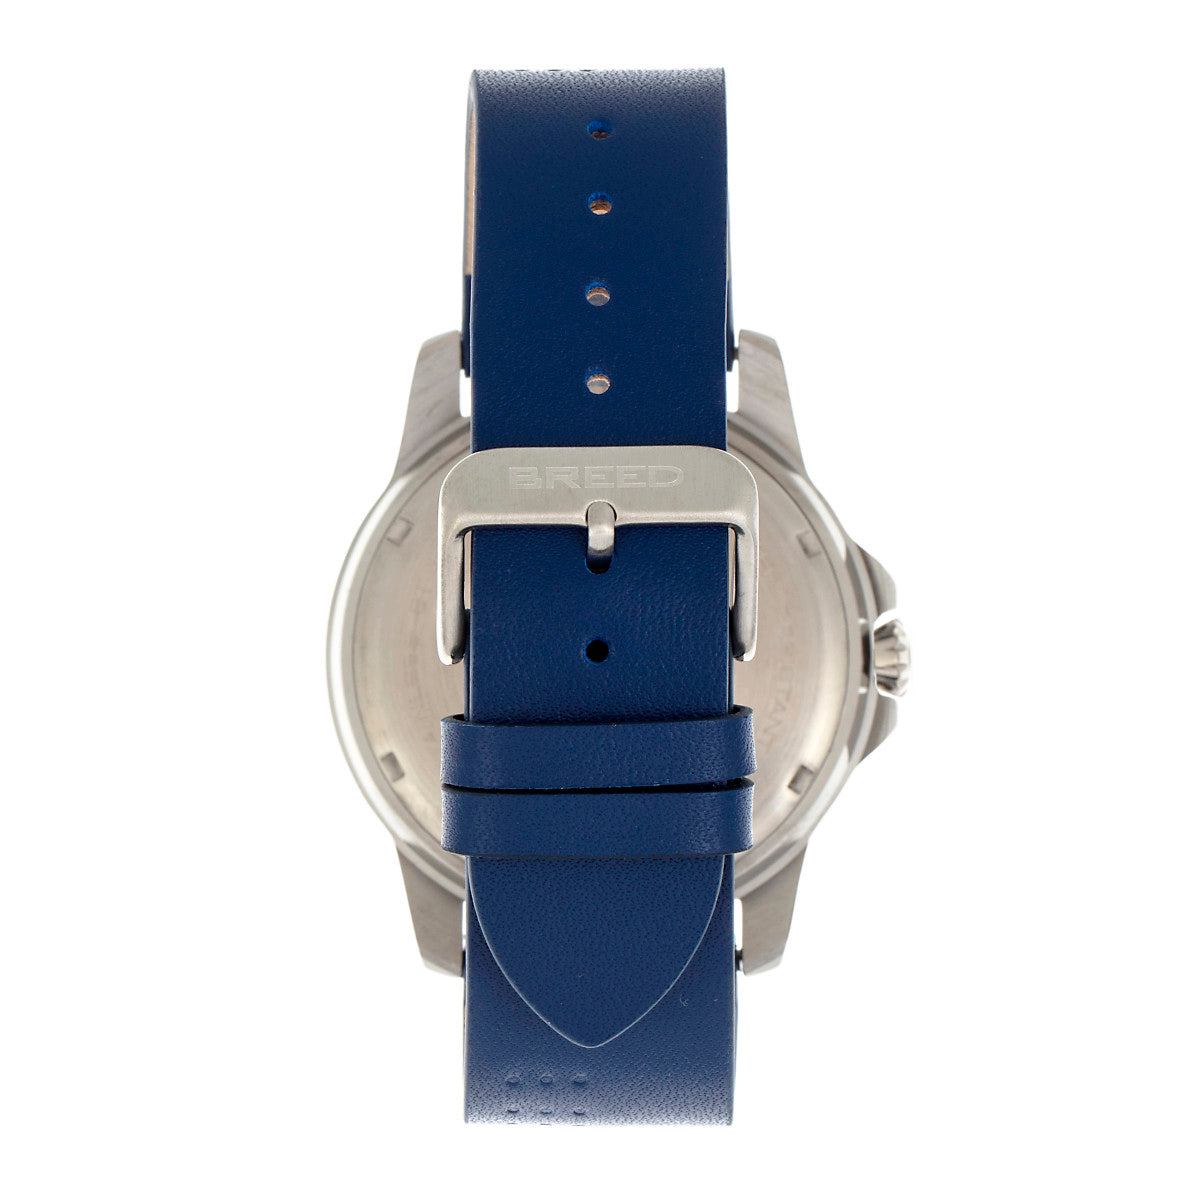 Breed Revolution Leather-Band Watch w/Date - Blue - BRD8301